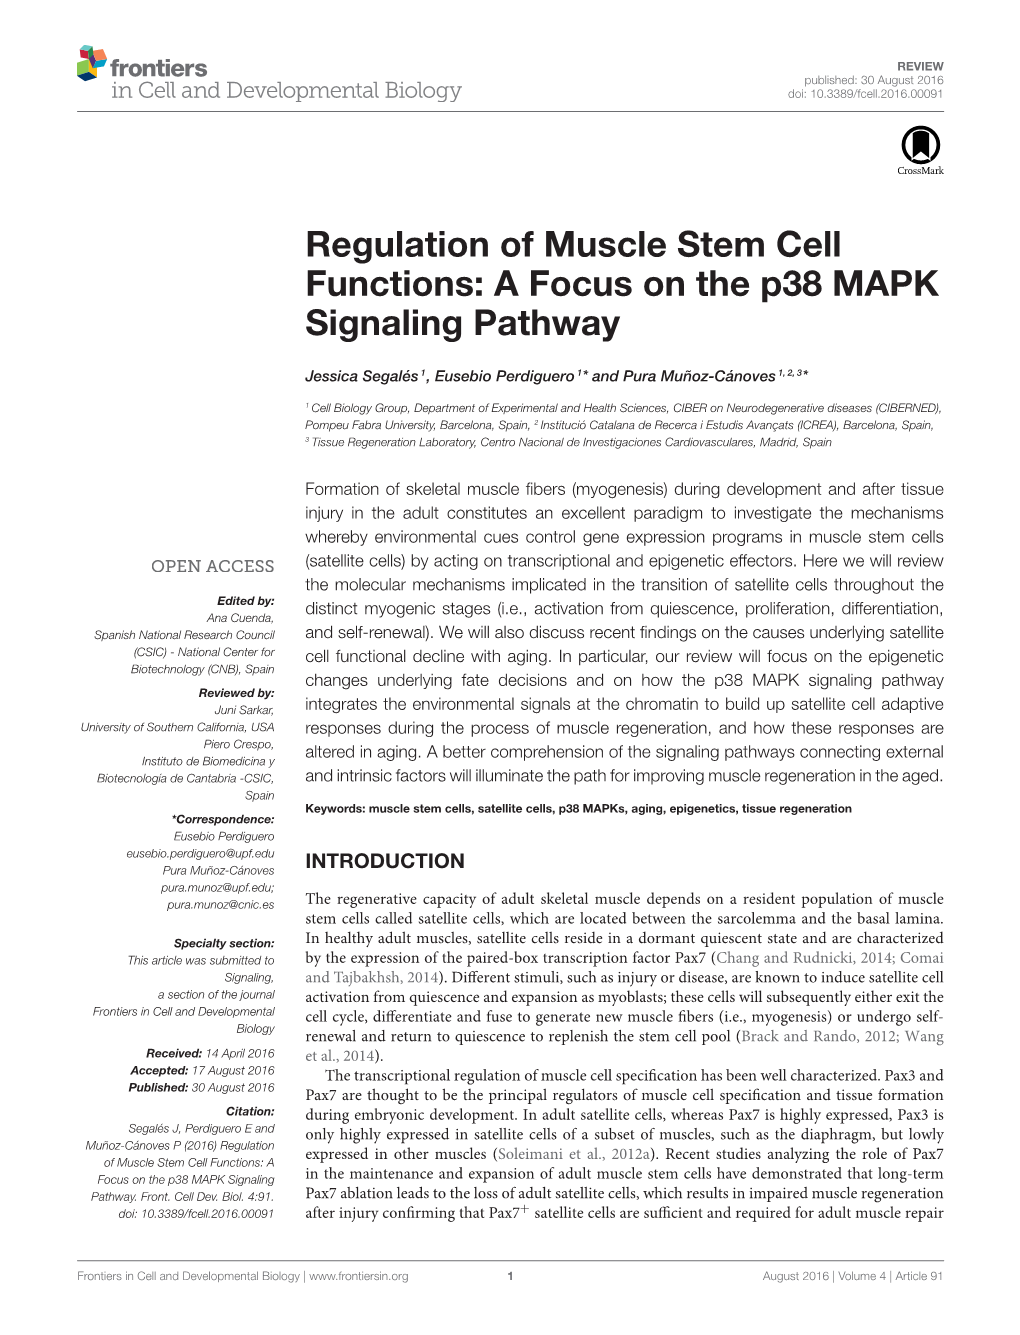 Regulation of Muscle Stem Cell Functions: a Focus on the P38 MAPK Signaling Pathway